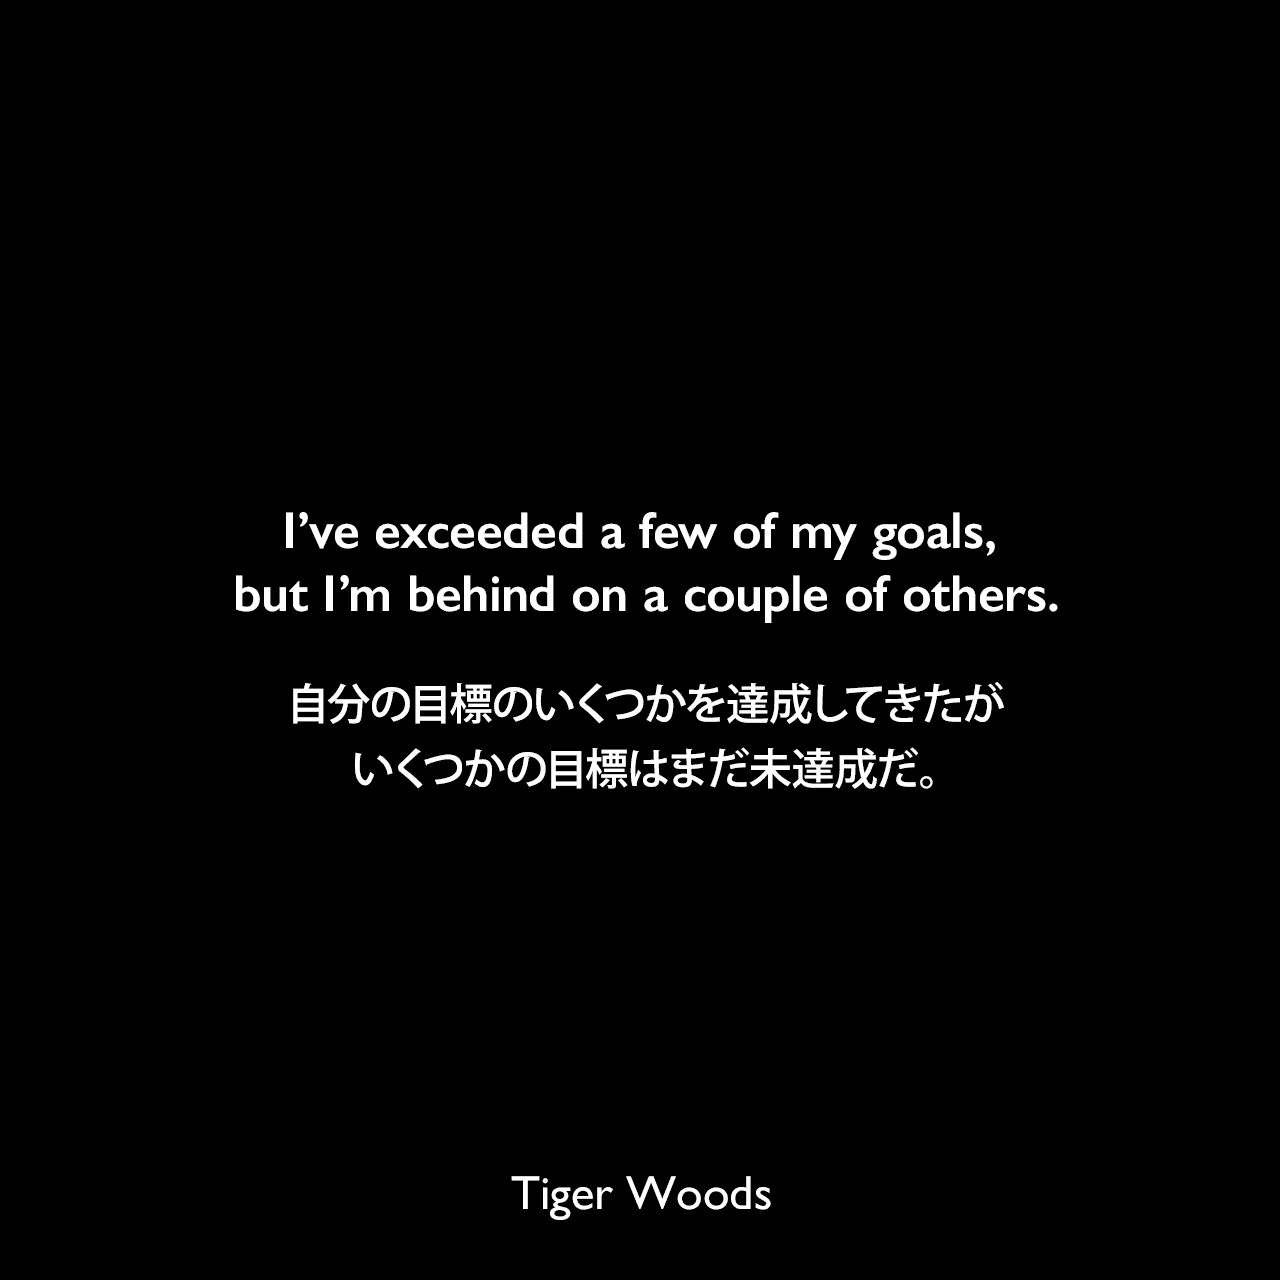 I’ve exceeded a few of my goals, but I’m behind on a couple of others.自分の目標のいくつかを達成してきたが、いくつかの目標はまだ未達成だ。Tiger Woods